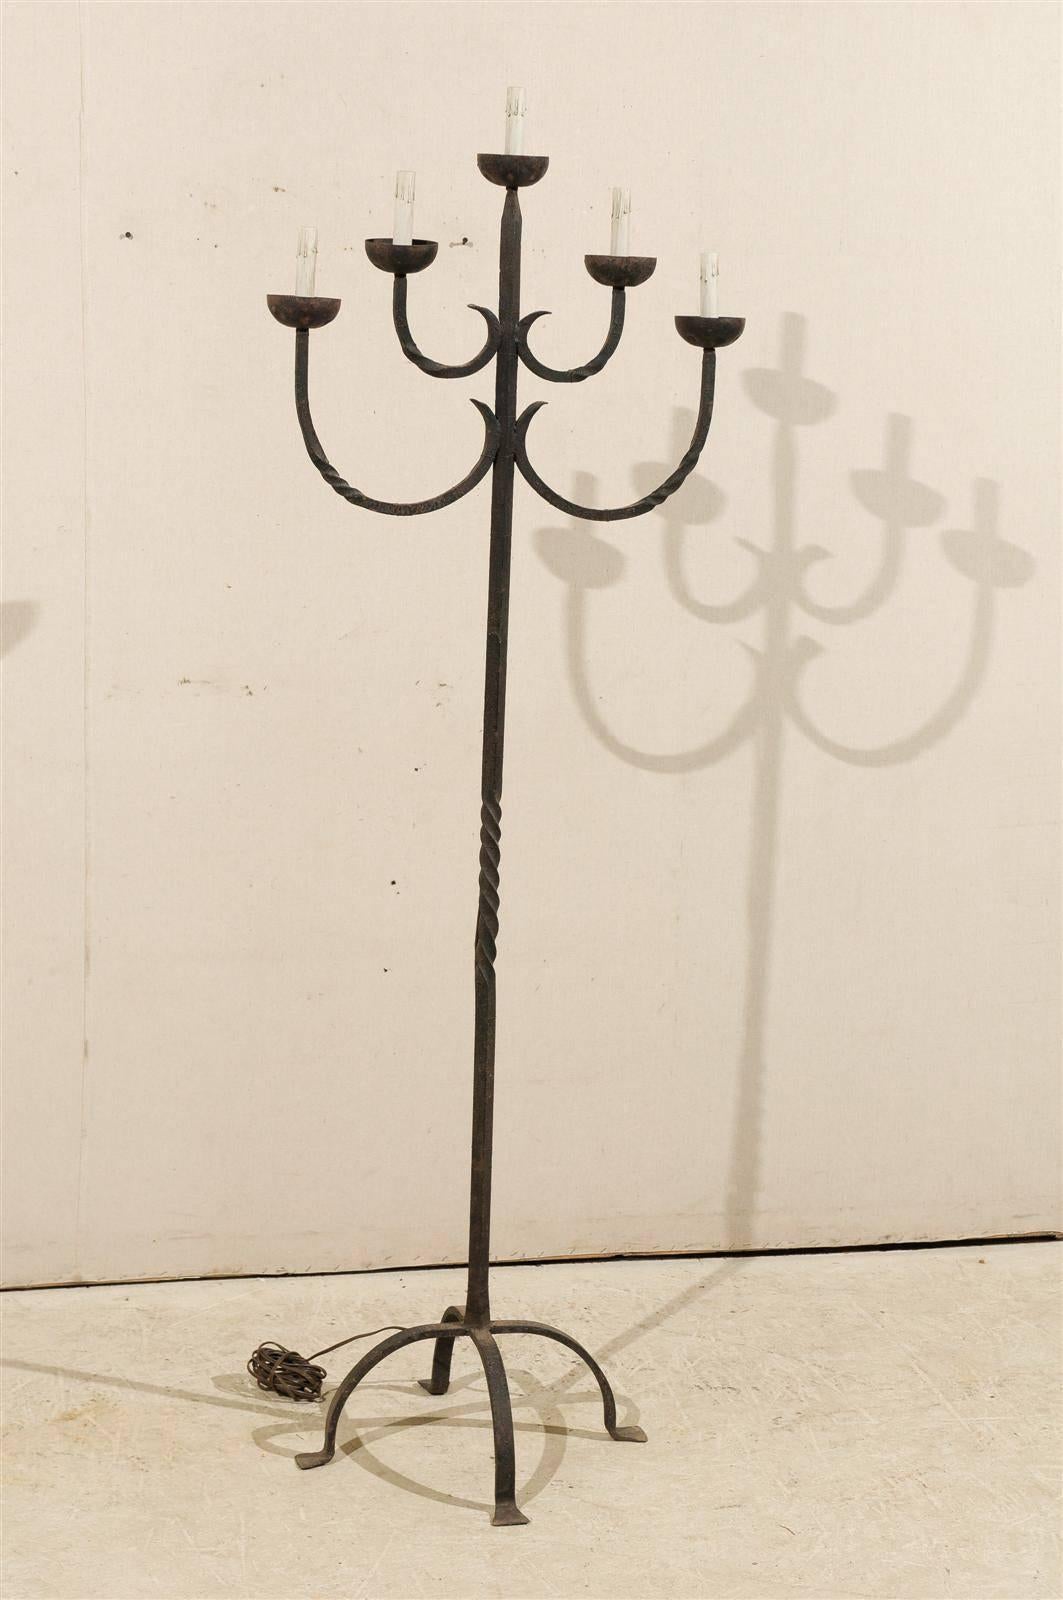 A French Five-Light Wrought Iron Floor Lamp on Quadripod Base from the mid-20th Century.

This wrought iron floor lamp has been rewired for the US.

.